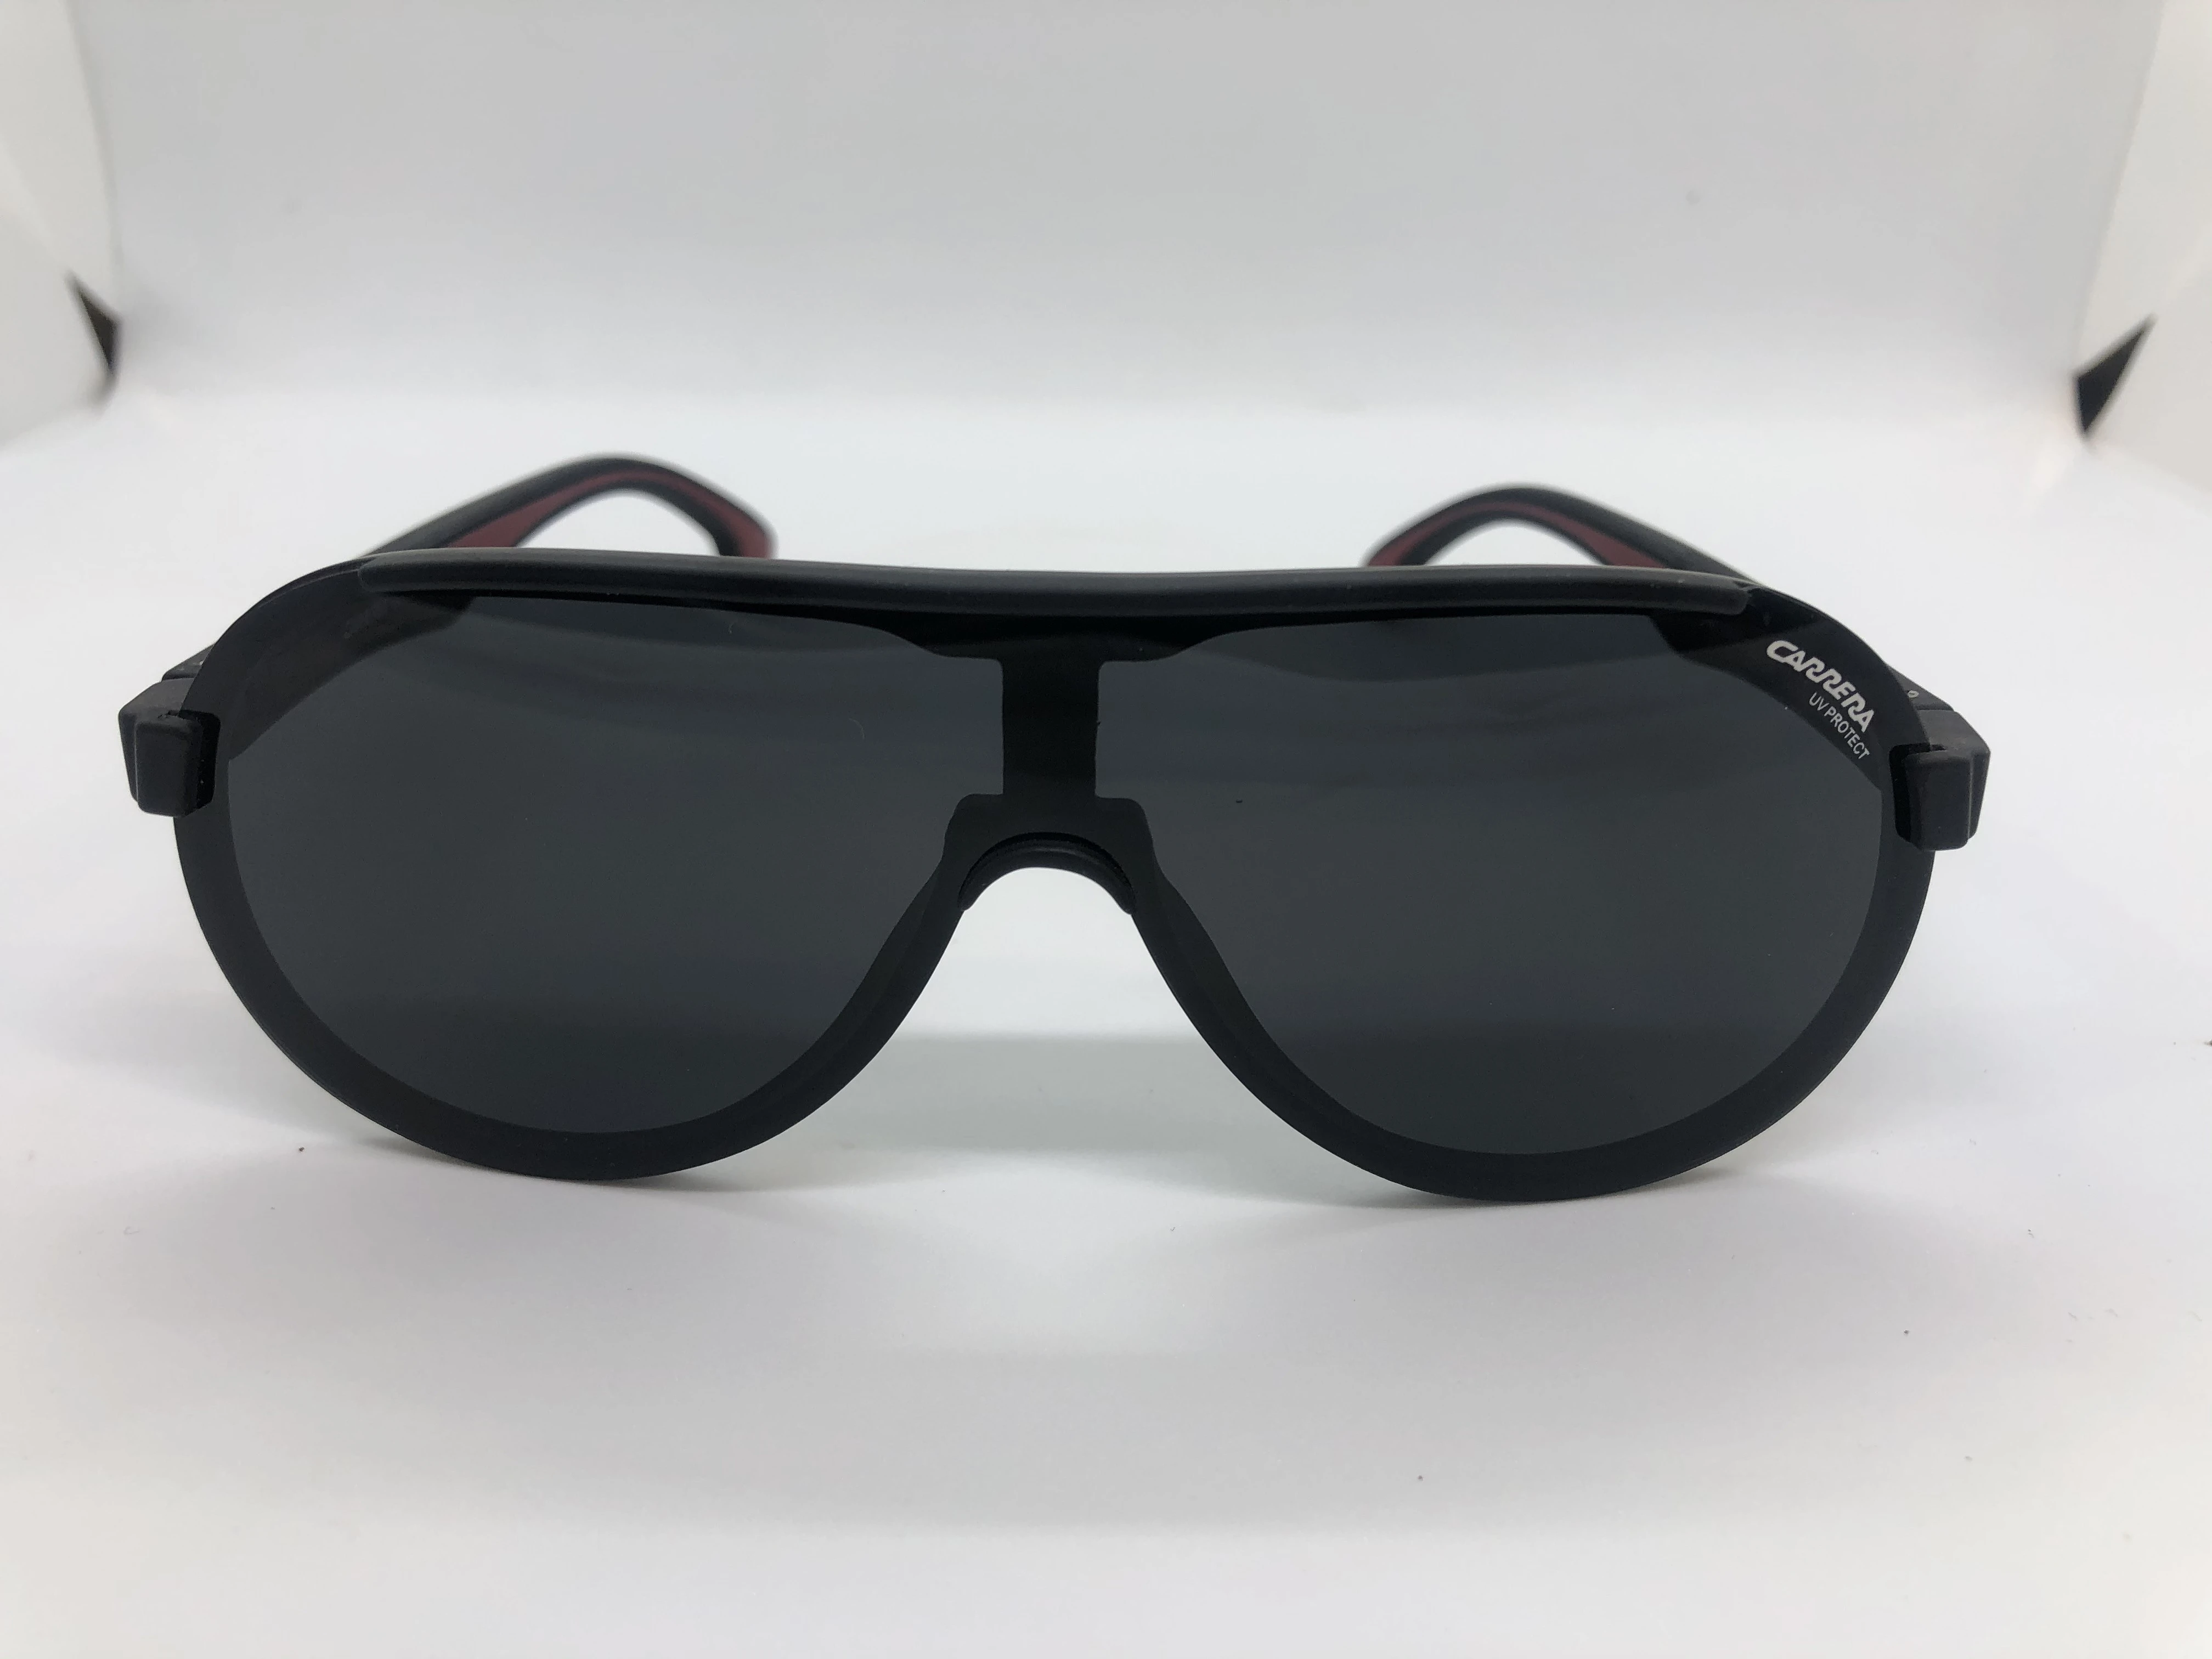 Sunglasses - black from Carrera - with a black polycarbonate frame - and black lenses - for men